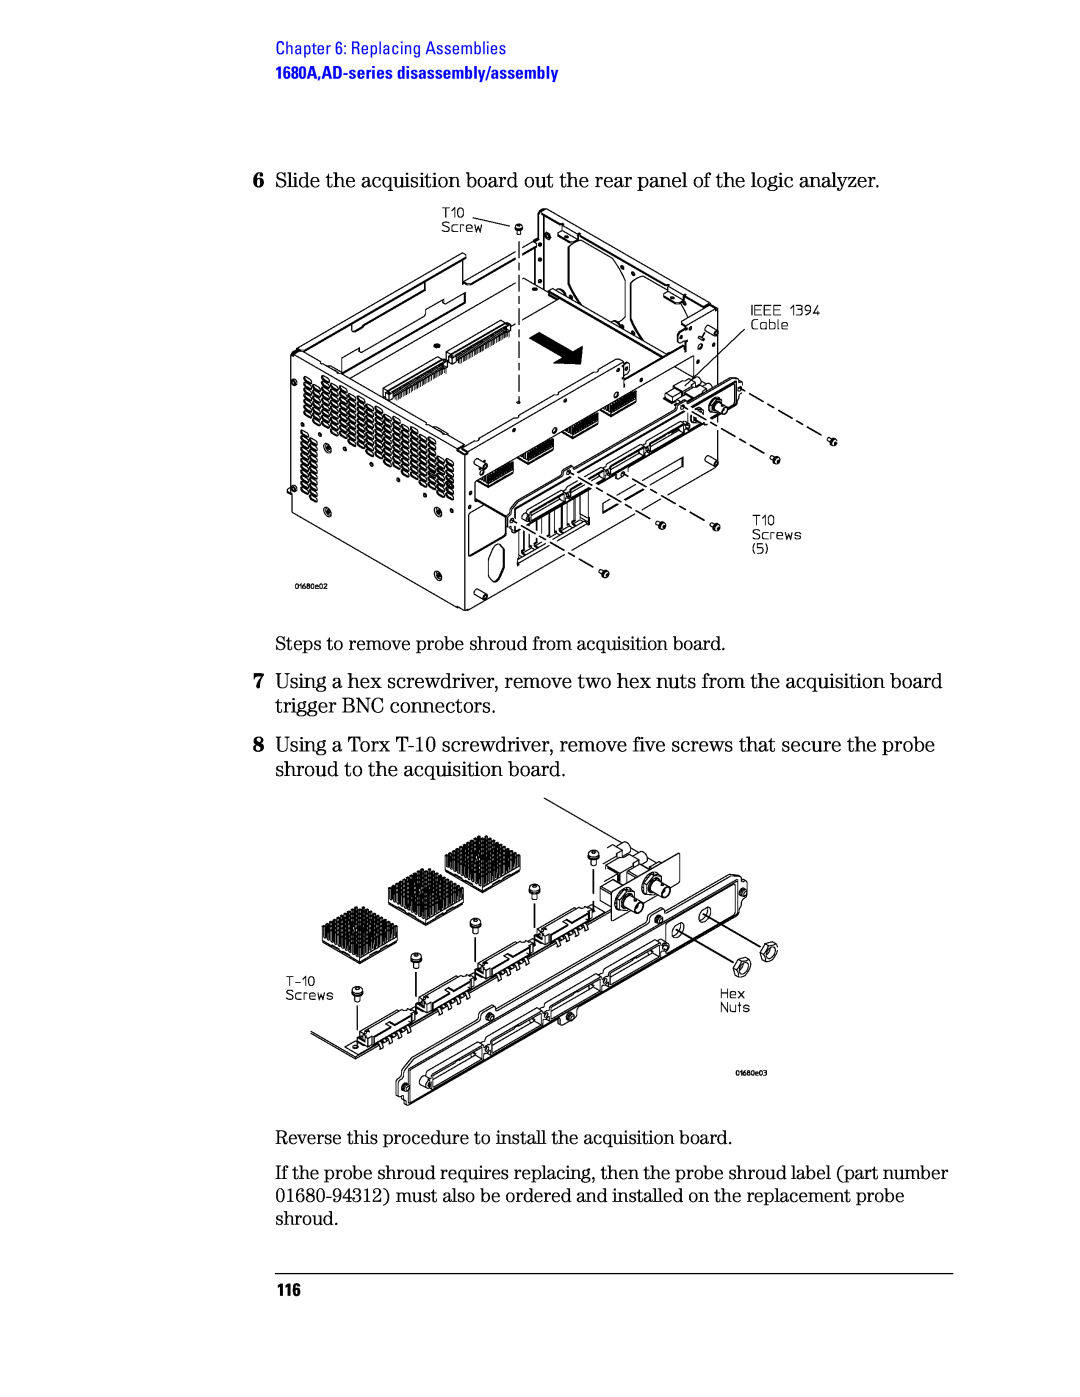 Agilent Technologies 1680, 1690 manual Steps to remove probe shroud from acquisition board 